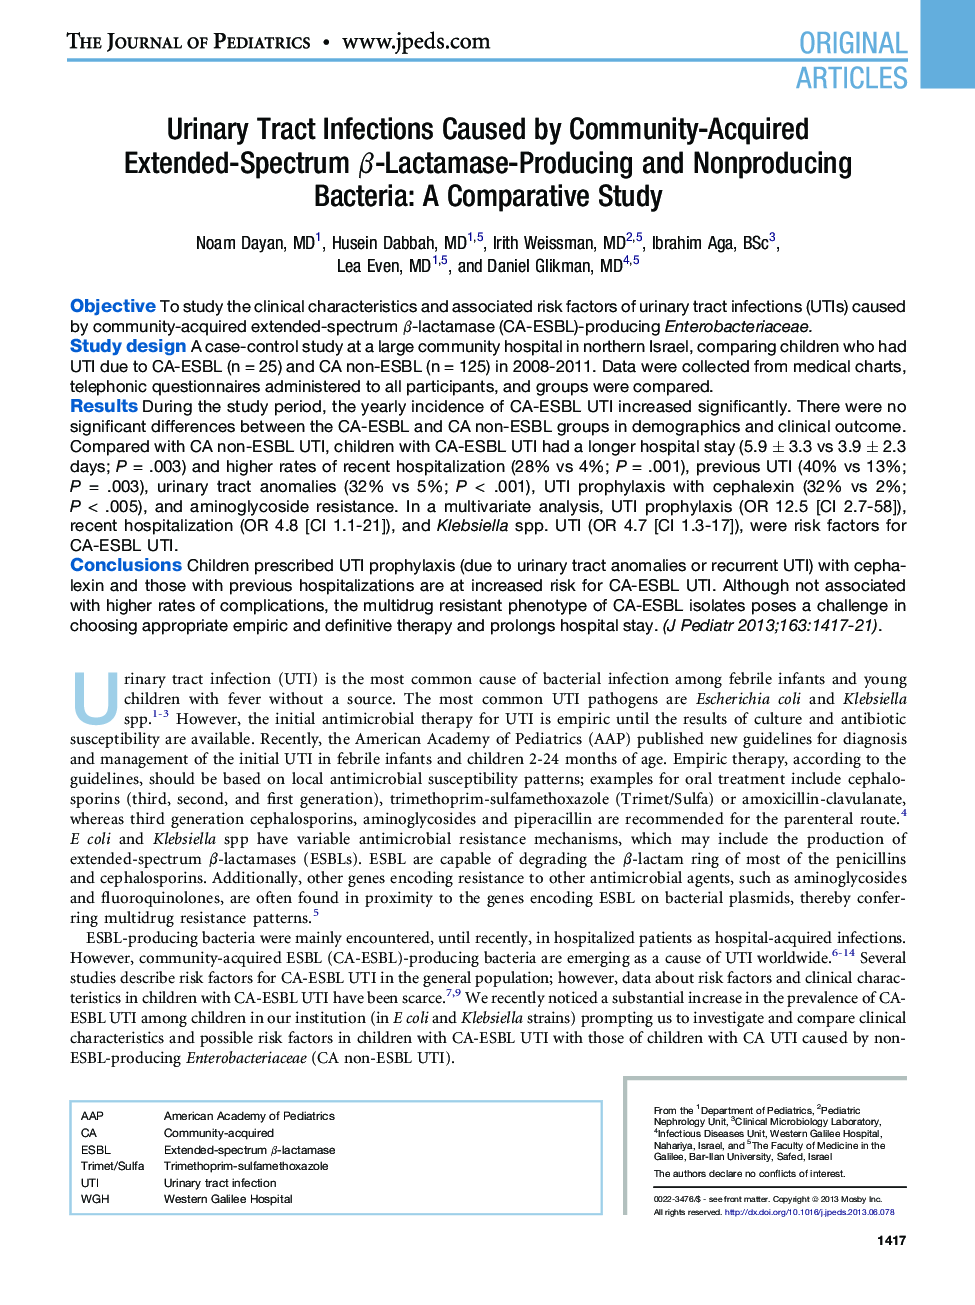 Urinary Tract Infections Caused by Community-Acquired Extended-Spectrum Î²-Lactamase-Producing and Nonproducing Bacteria: A Comparative Study